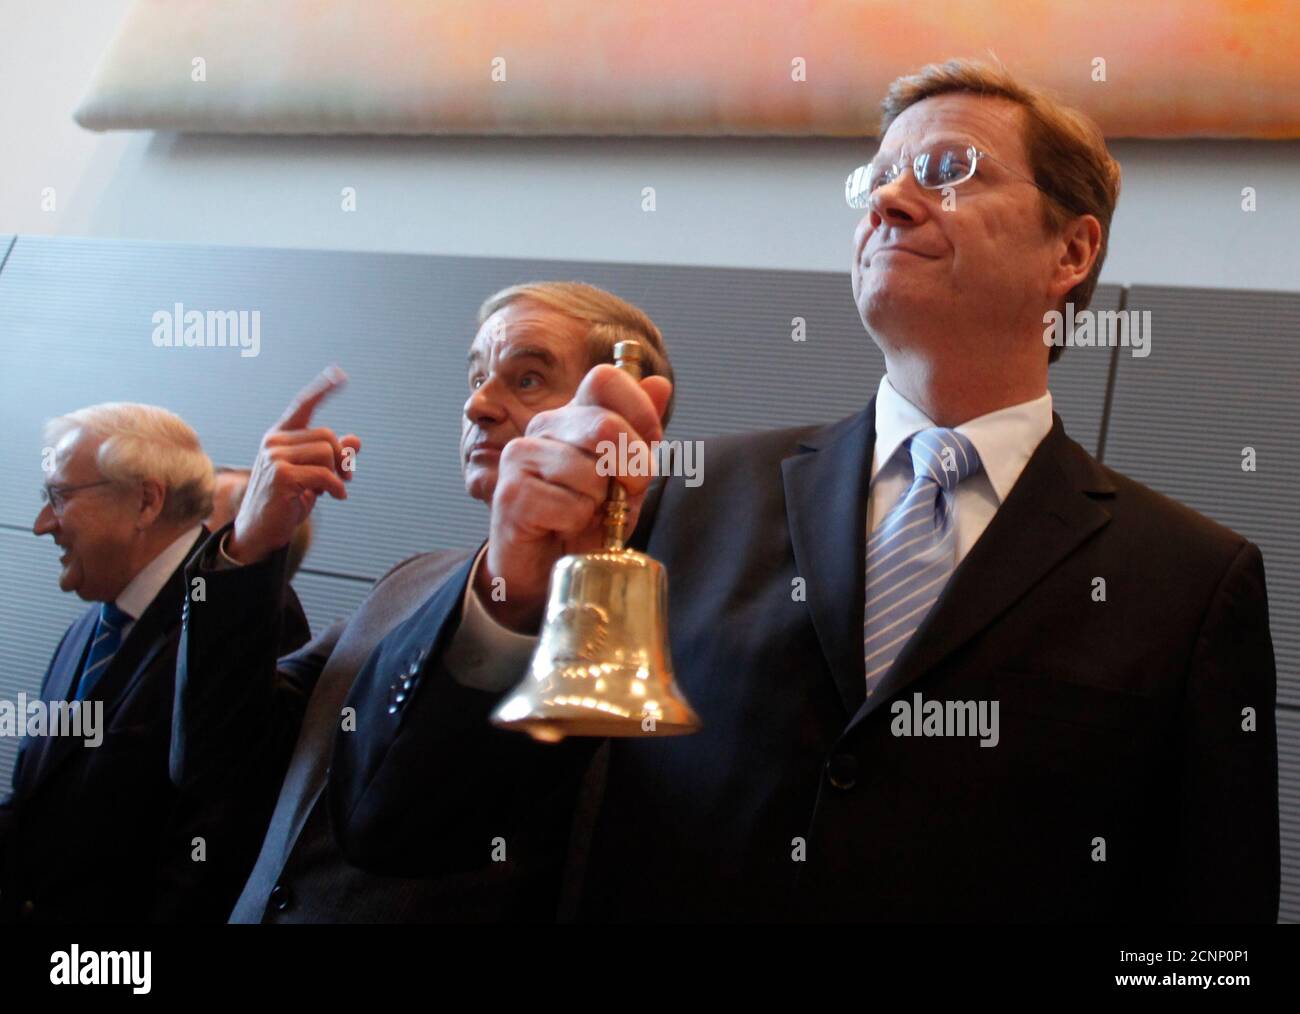 Leader of the Free Democrats Party (FDP) Guido Westerwelle (L) opens a meeting of the FDP parliamentary group in Berlin October 20, 2009. Also pictured are leading party members Rainer Bruederle and Joerg van Essenl  REUTERS/Thomas Peter (GERMANY POLITICS) Stock Photo